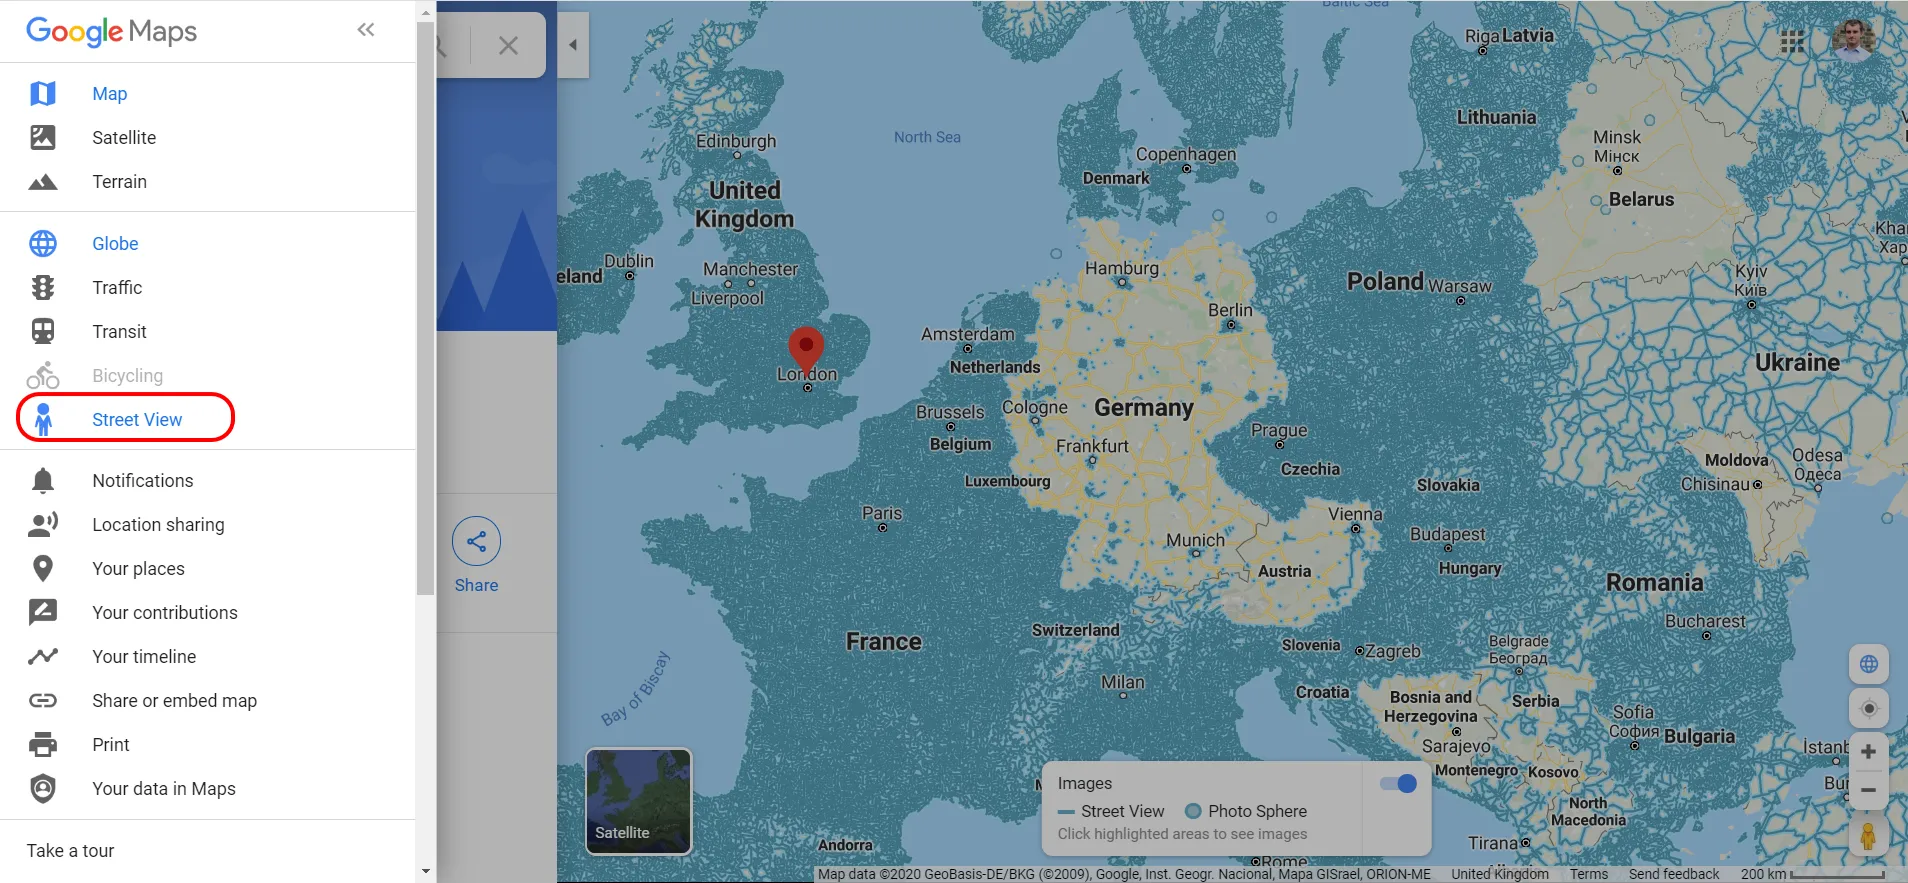 Google Maps Street View layer in Europe